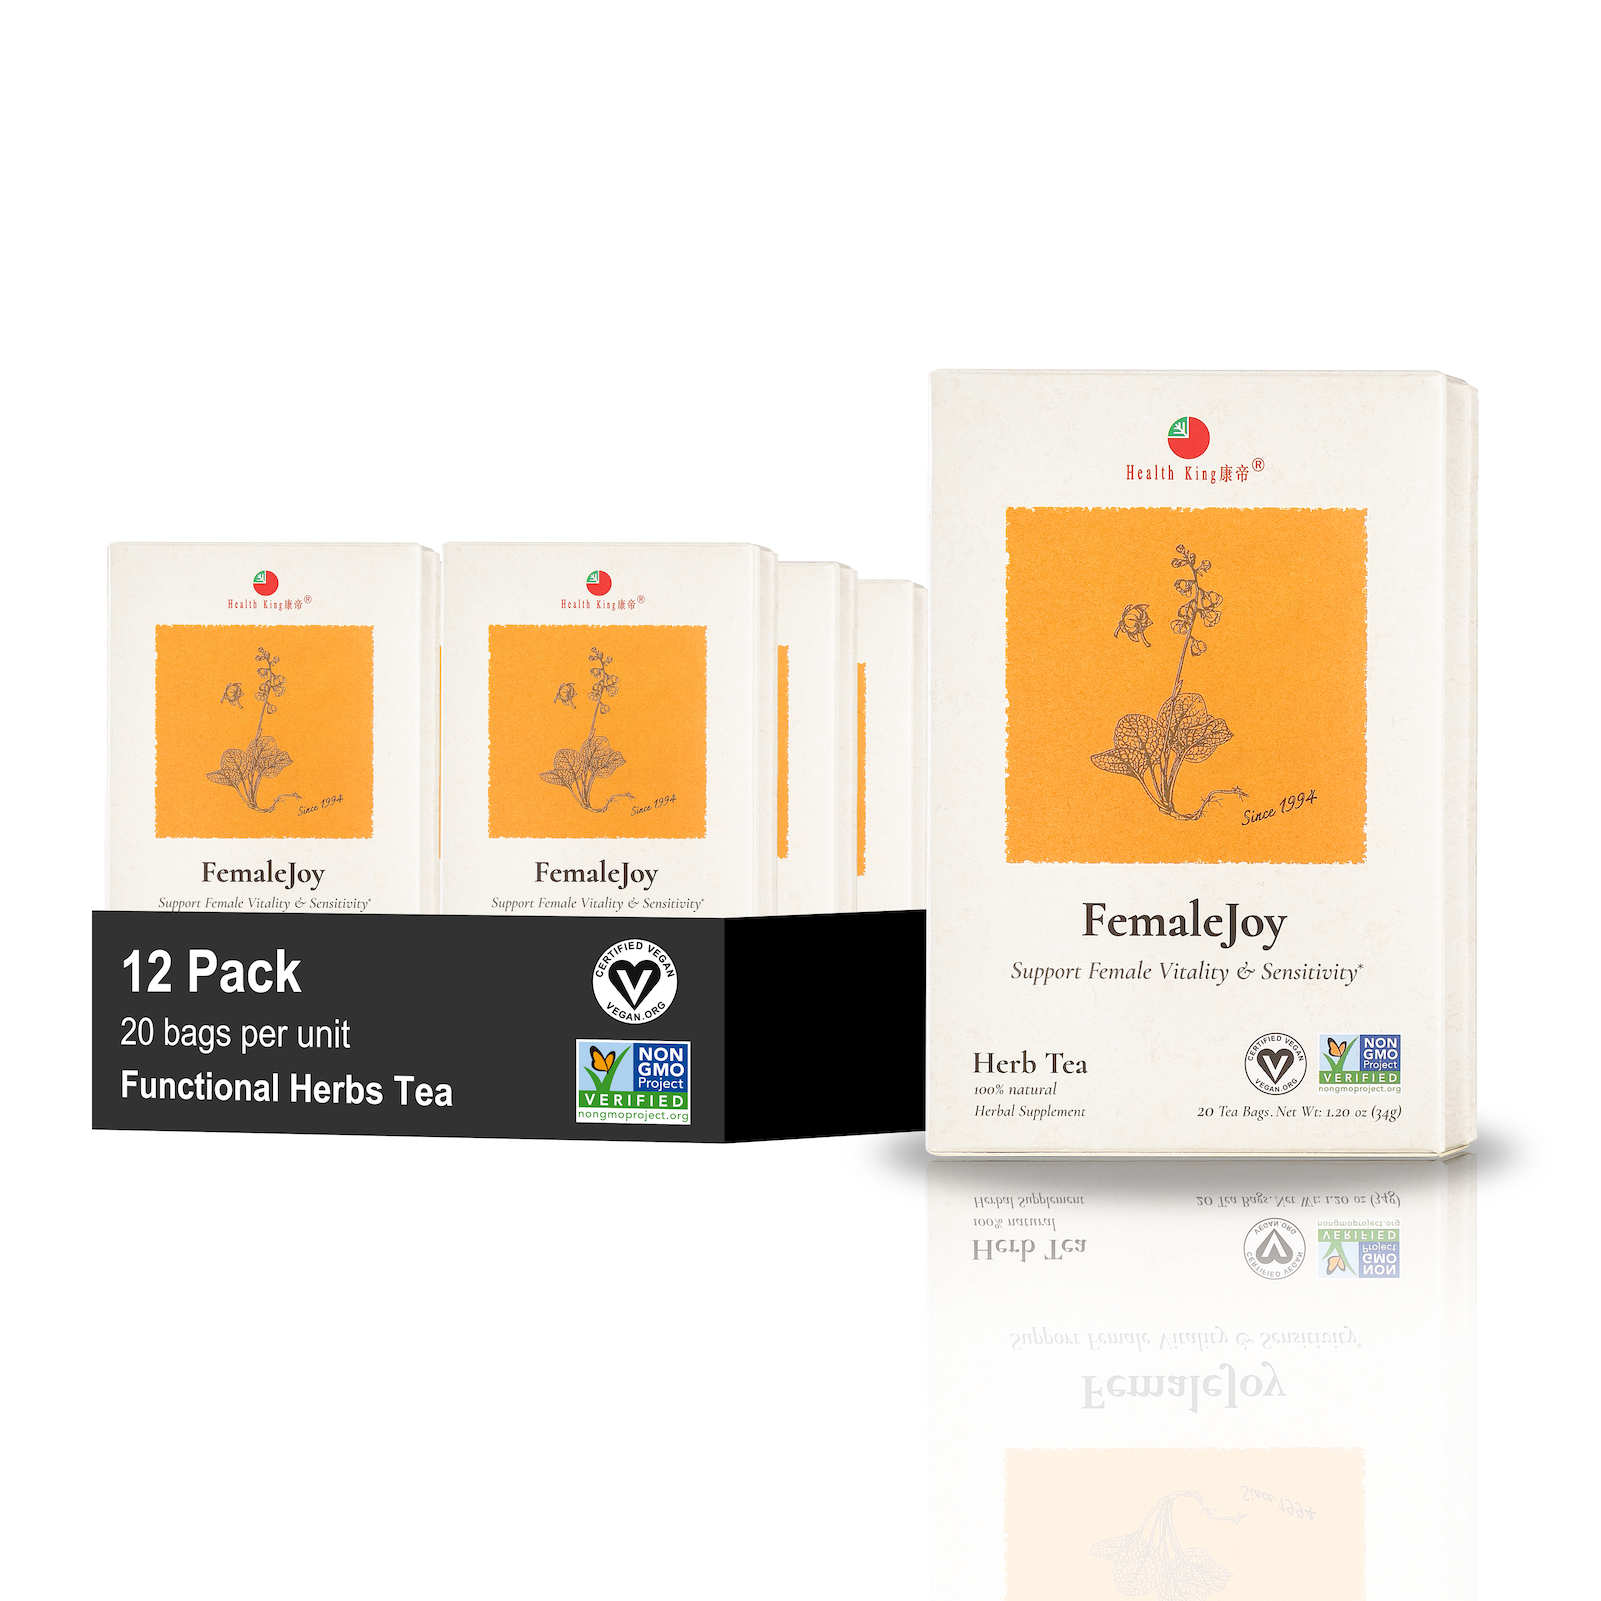 Twelve-pack of Female Joy Herb Tea for family use with focus on women's vitality